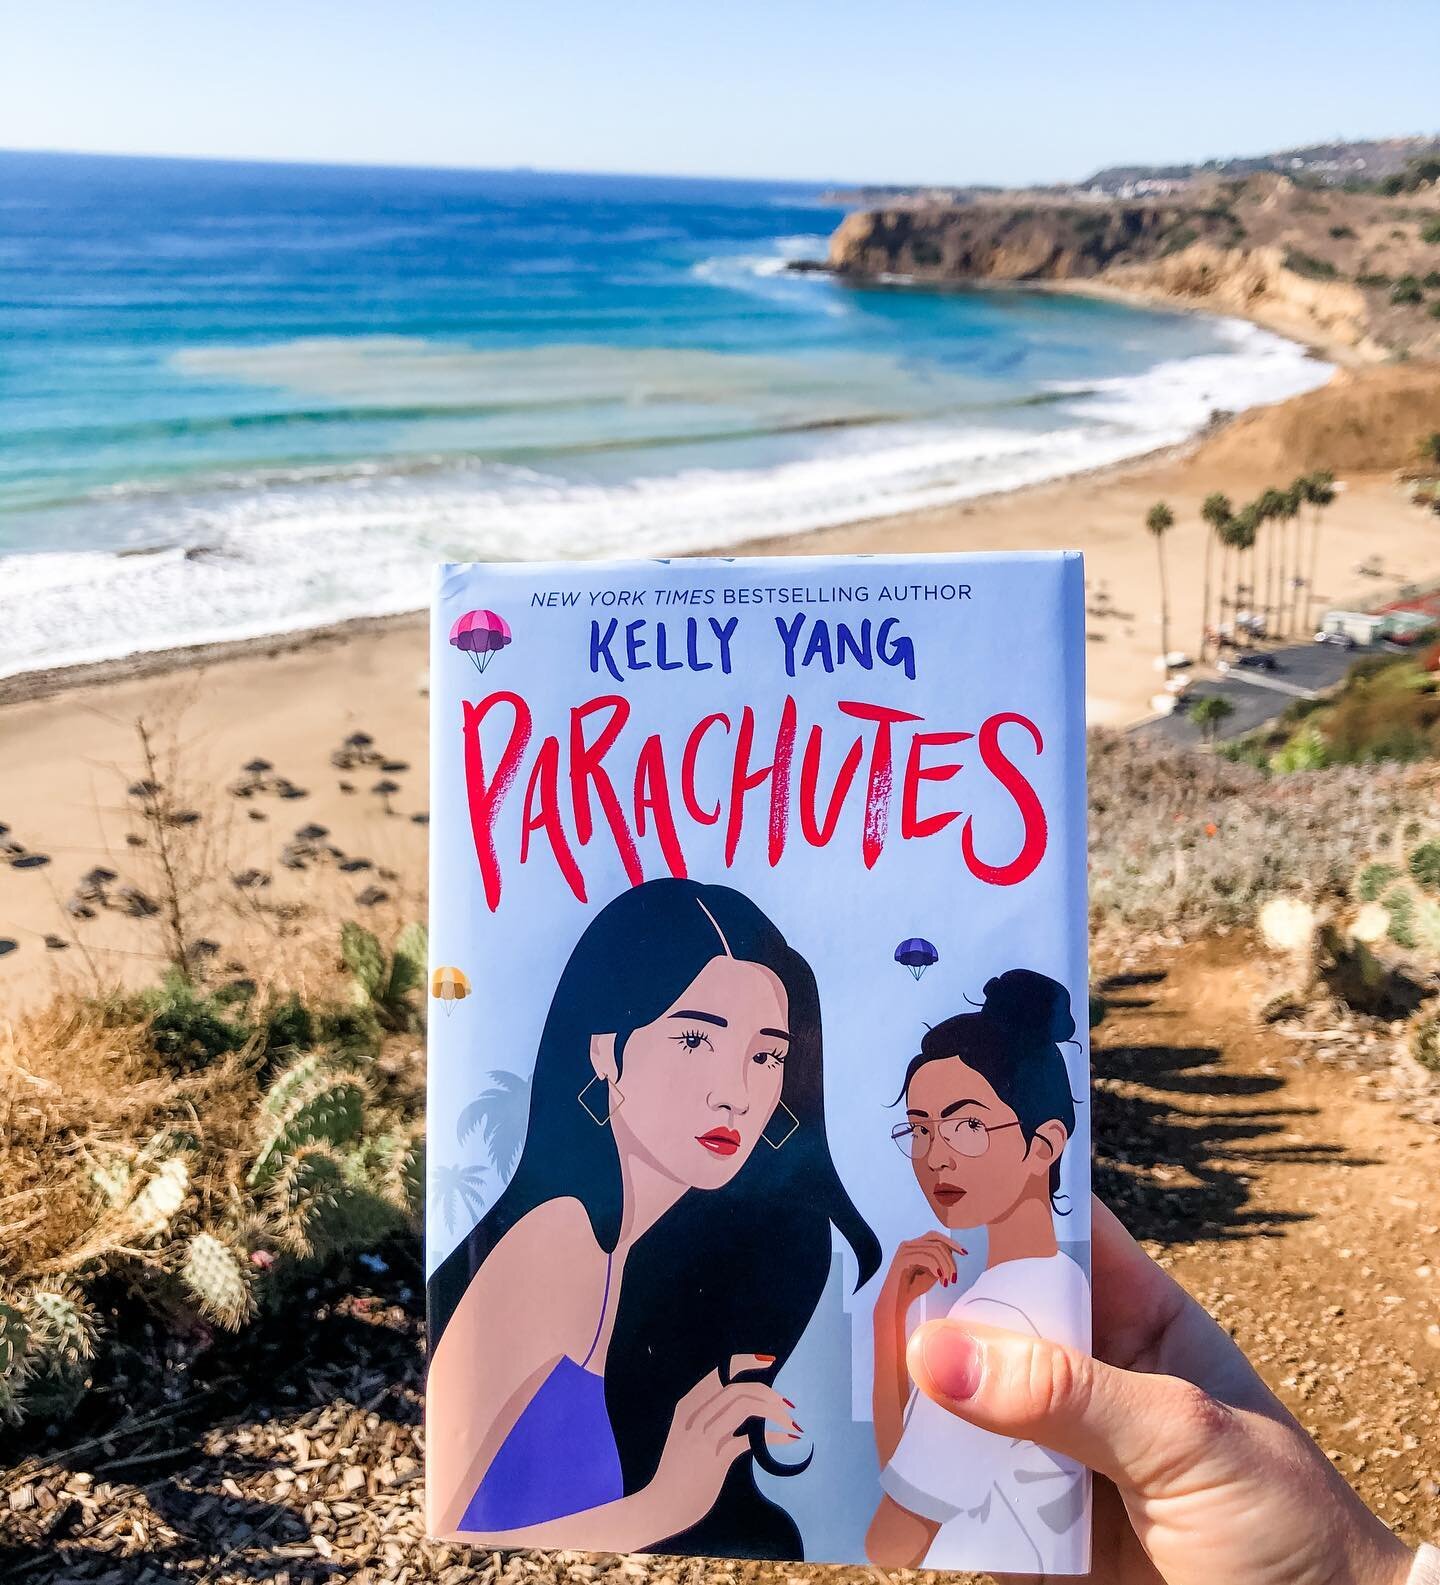 For Christmas, we gifted our 16 year old daughter the Young Adult novel Parachutes by New York Times Bestselling and award winning author Kelly Yang and she finished it in two days. While this daughter appreciates books, she has always chosen physica